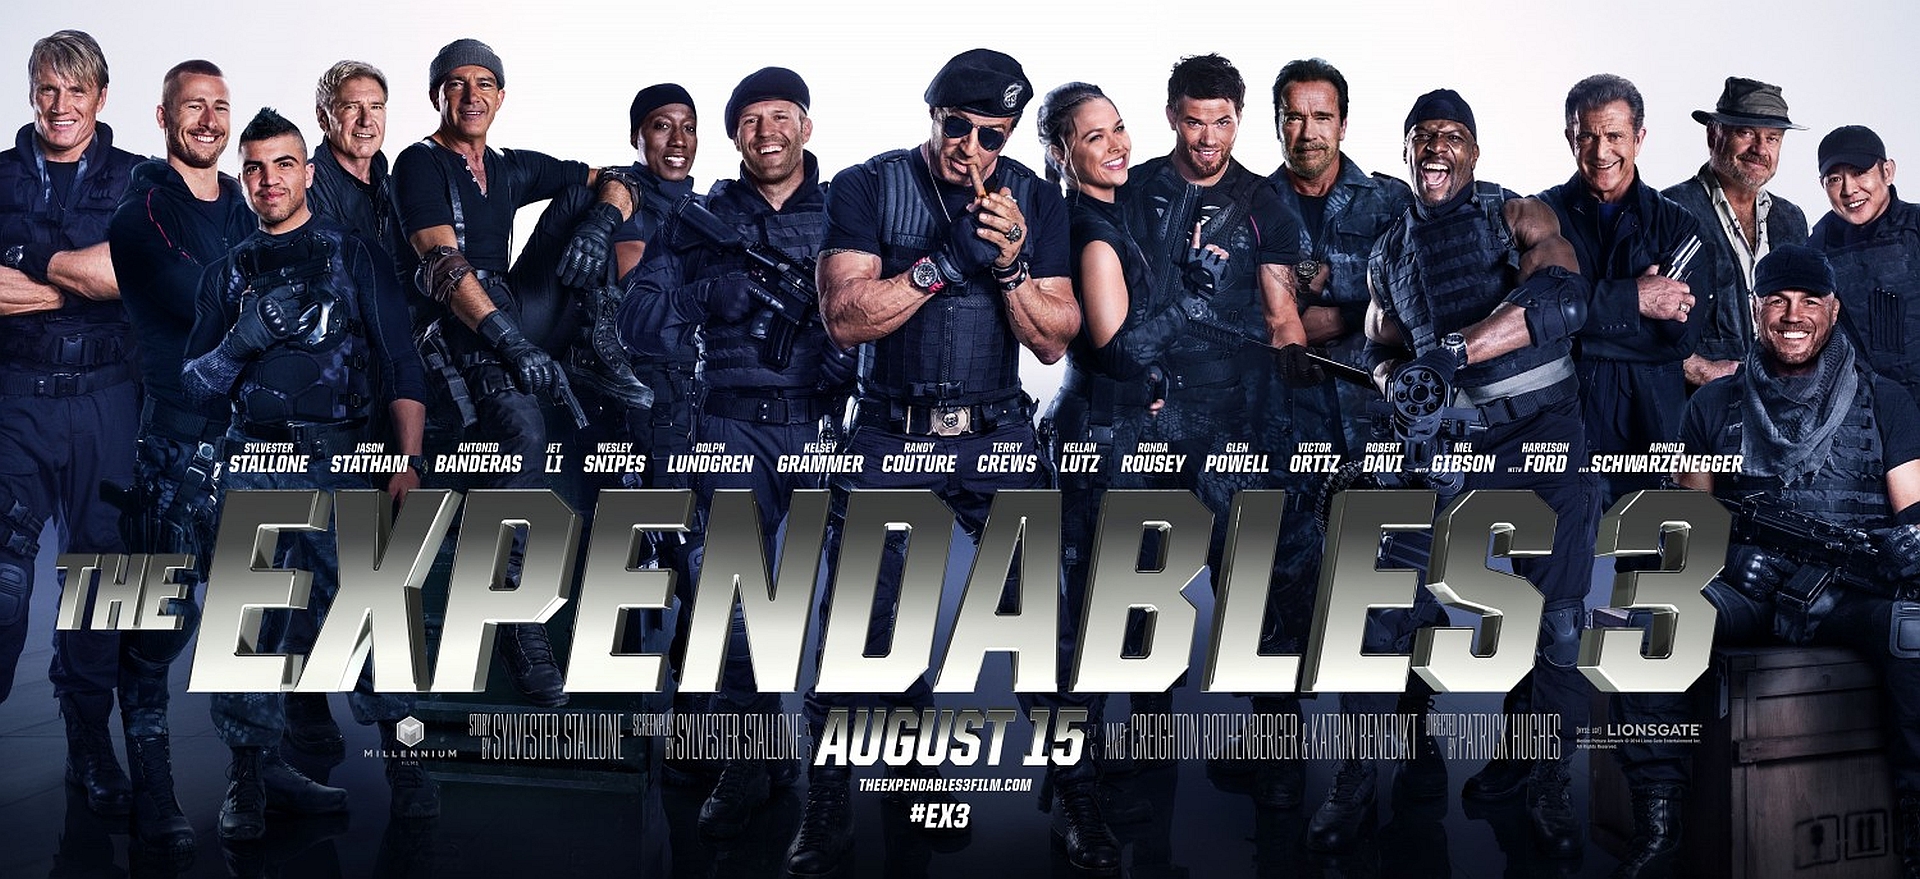 movie, the expendables 3, antonio banderas, arnold schwarzenegger, glen powell, harrison ford, jason statham, kellan lutz, mel gibson, ronda rousey, sylvester stallone, terry crews, wesley snipes, the expendables for android